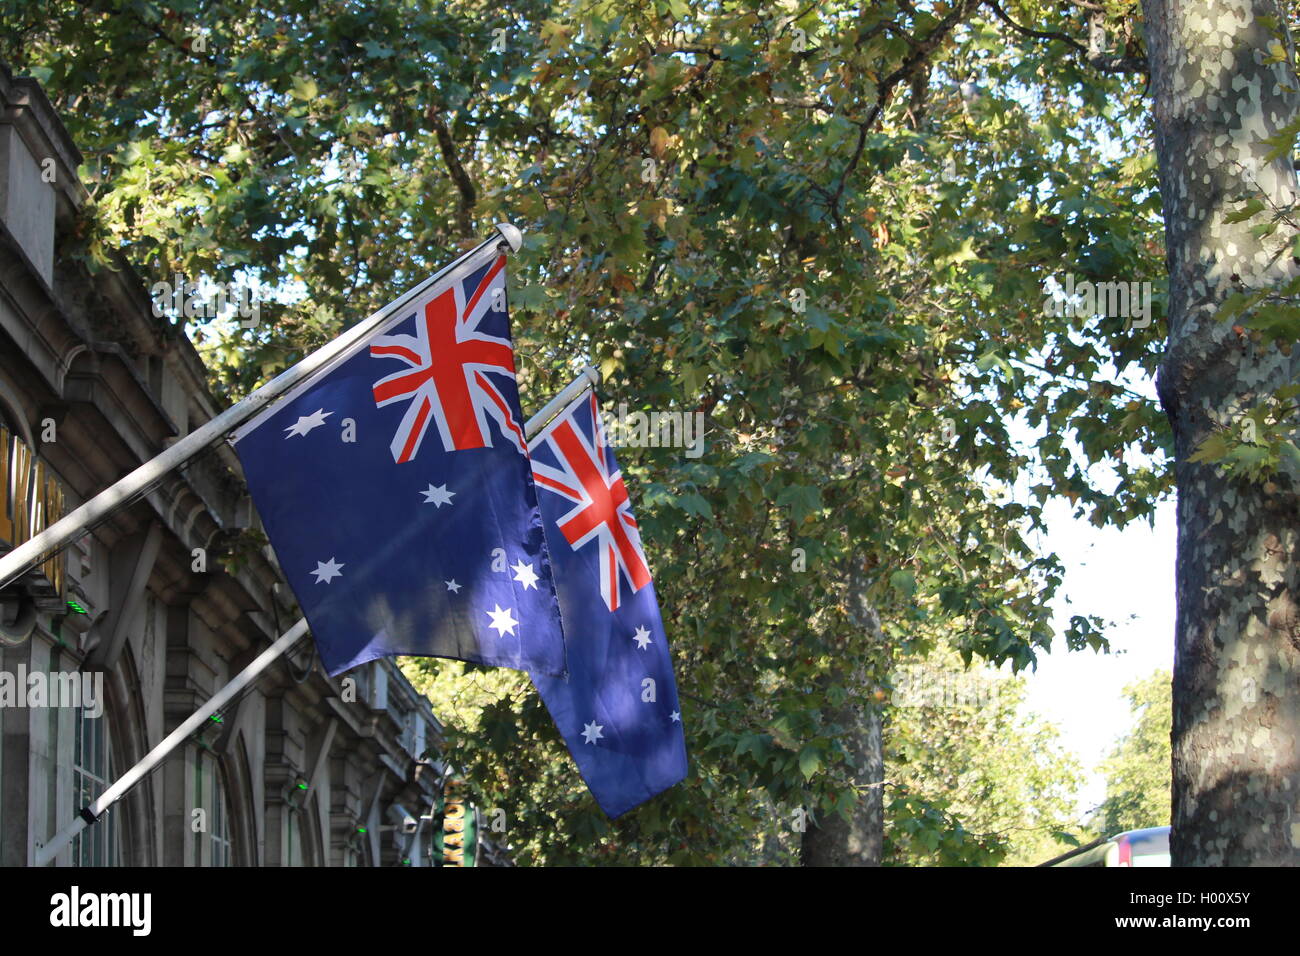 Australian flag, flag of Australia, defaced blue ensign, Union Jack in the canton, seven pointed star, Commonwealth Star, 1901 Stock Photo